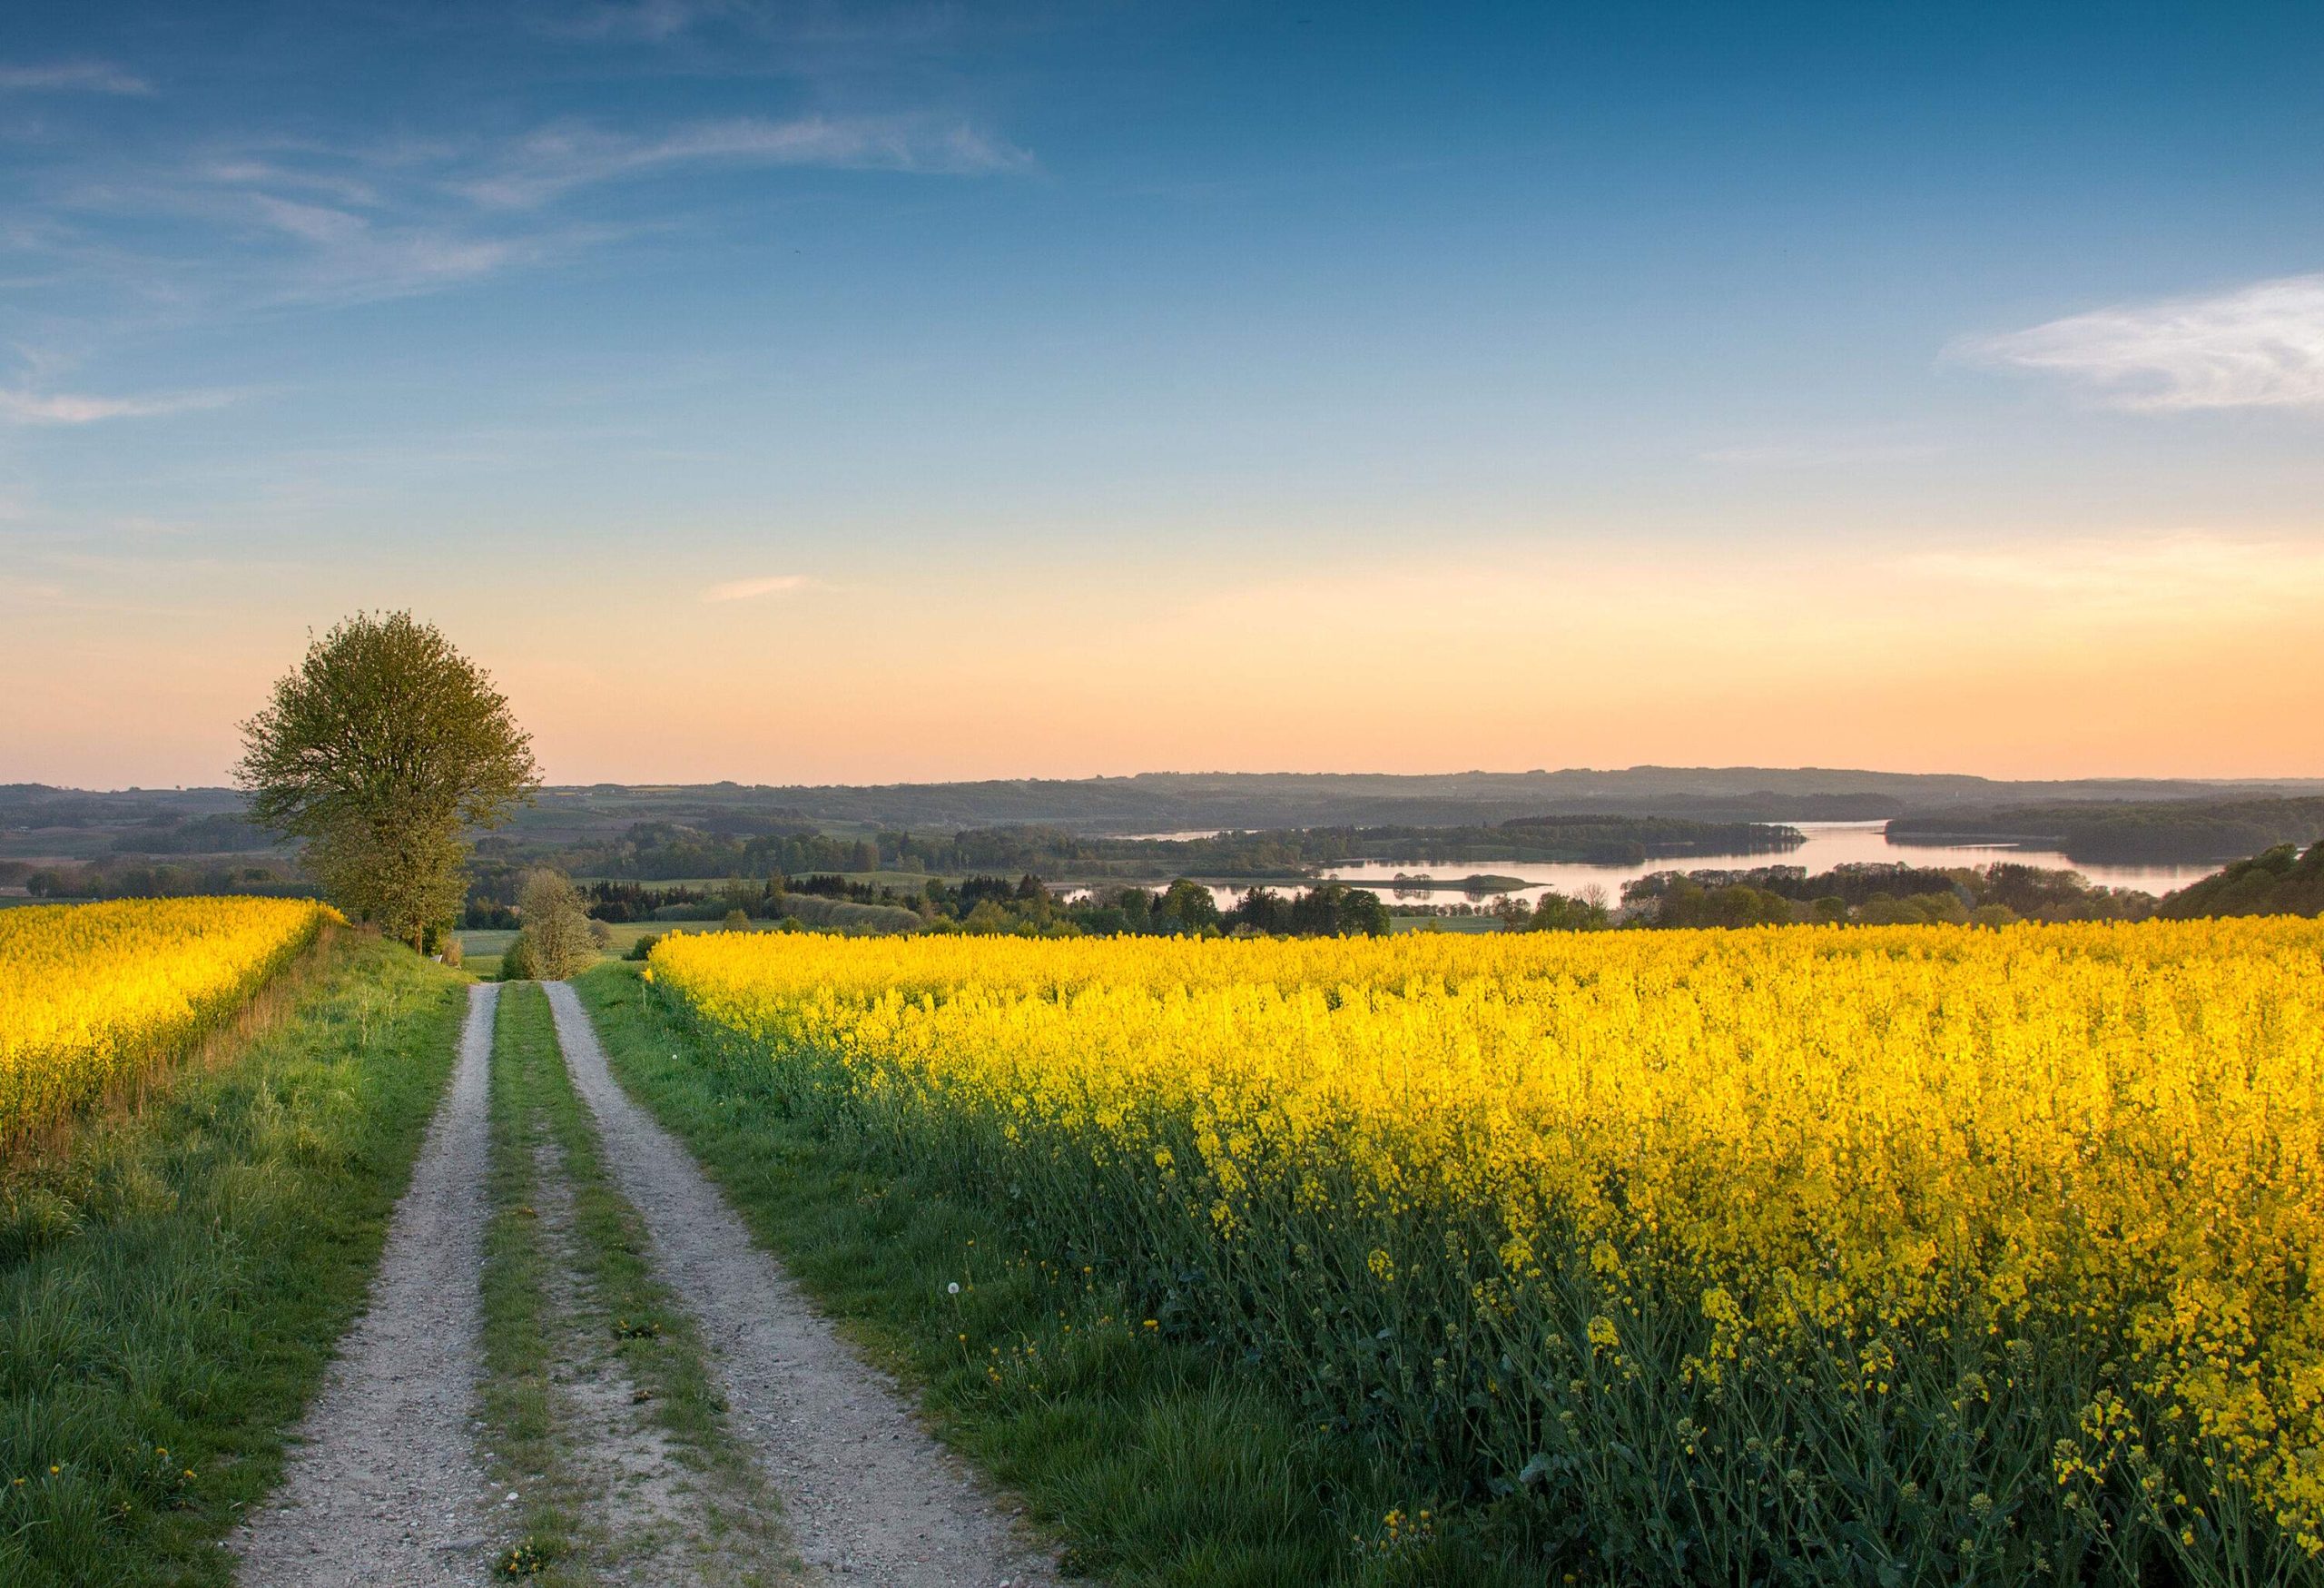 A straight dirt path runs through a field of bright yellow rapeseed, overlooking the lake and trees. 